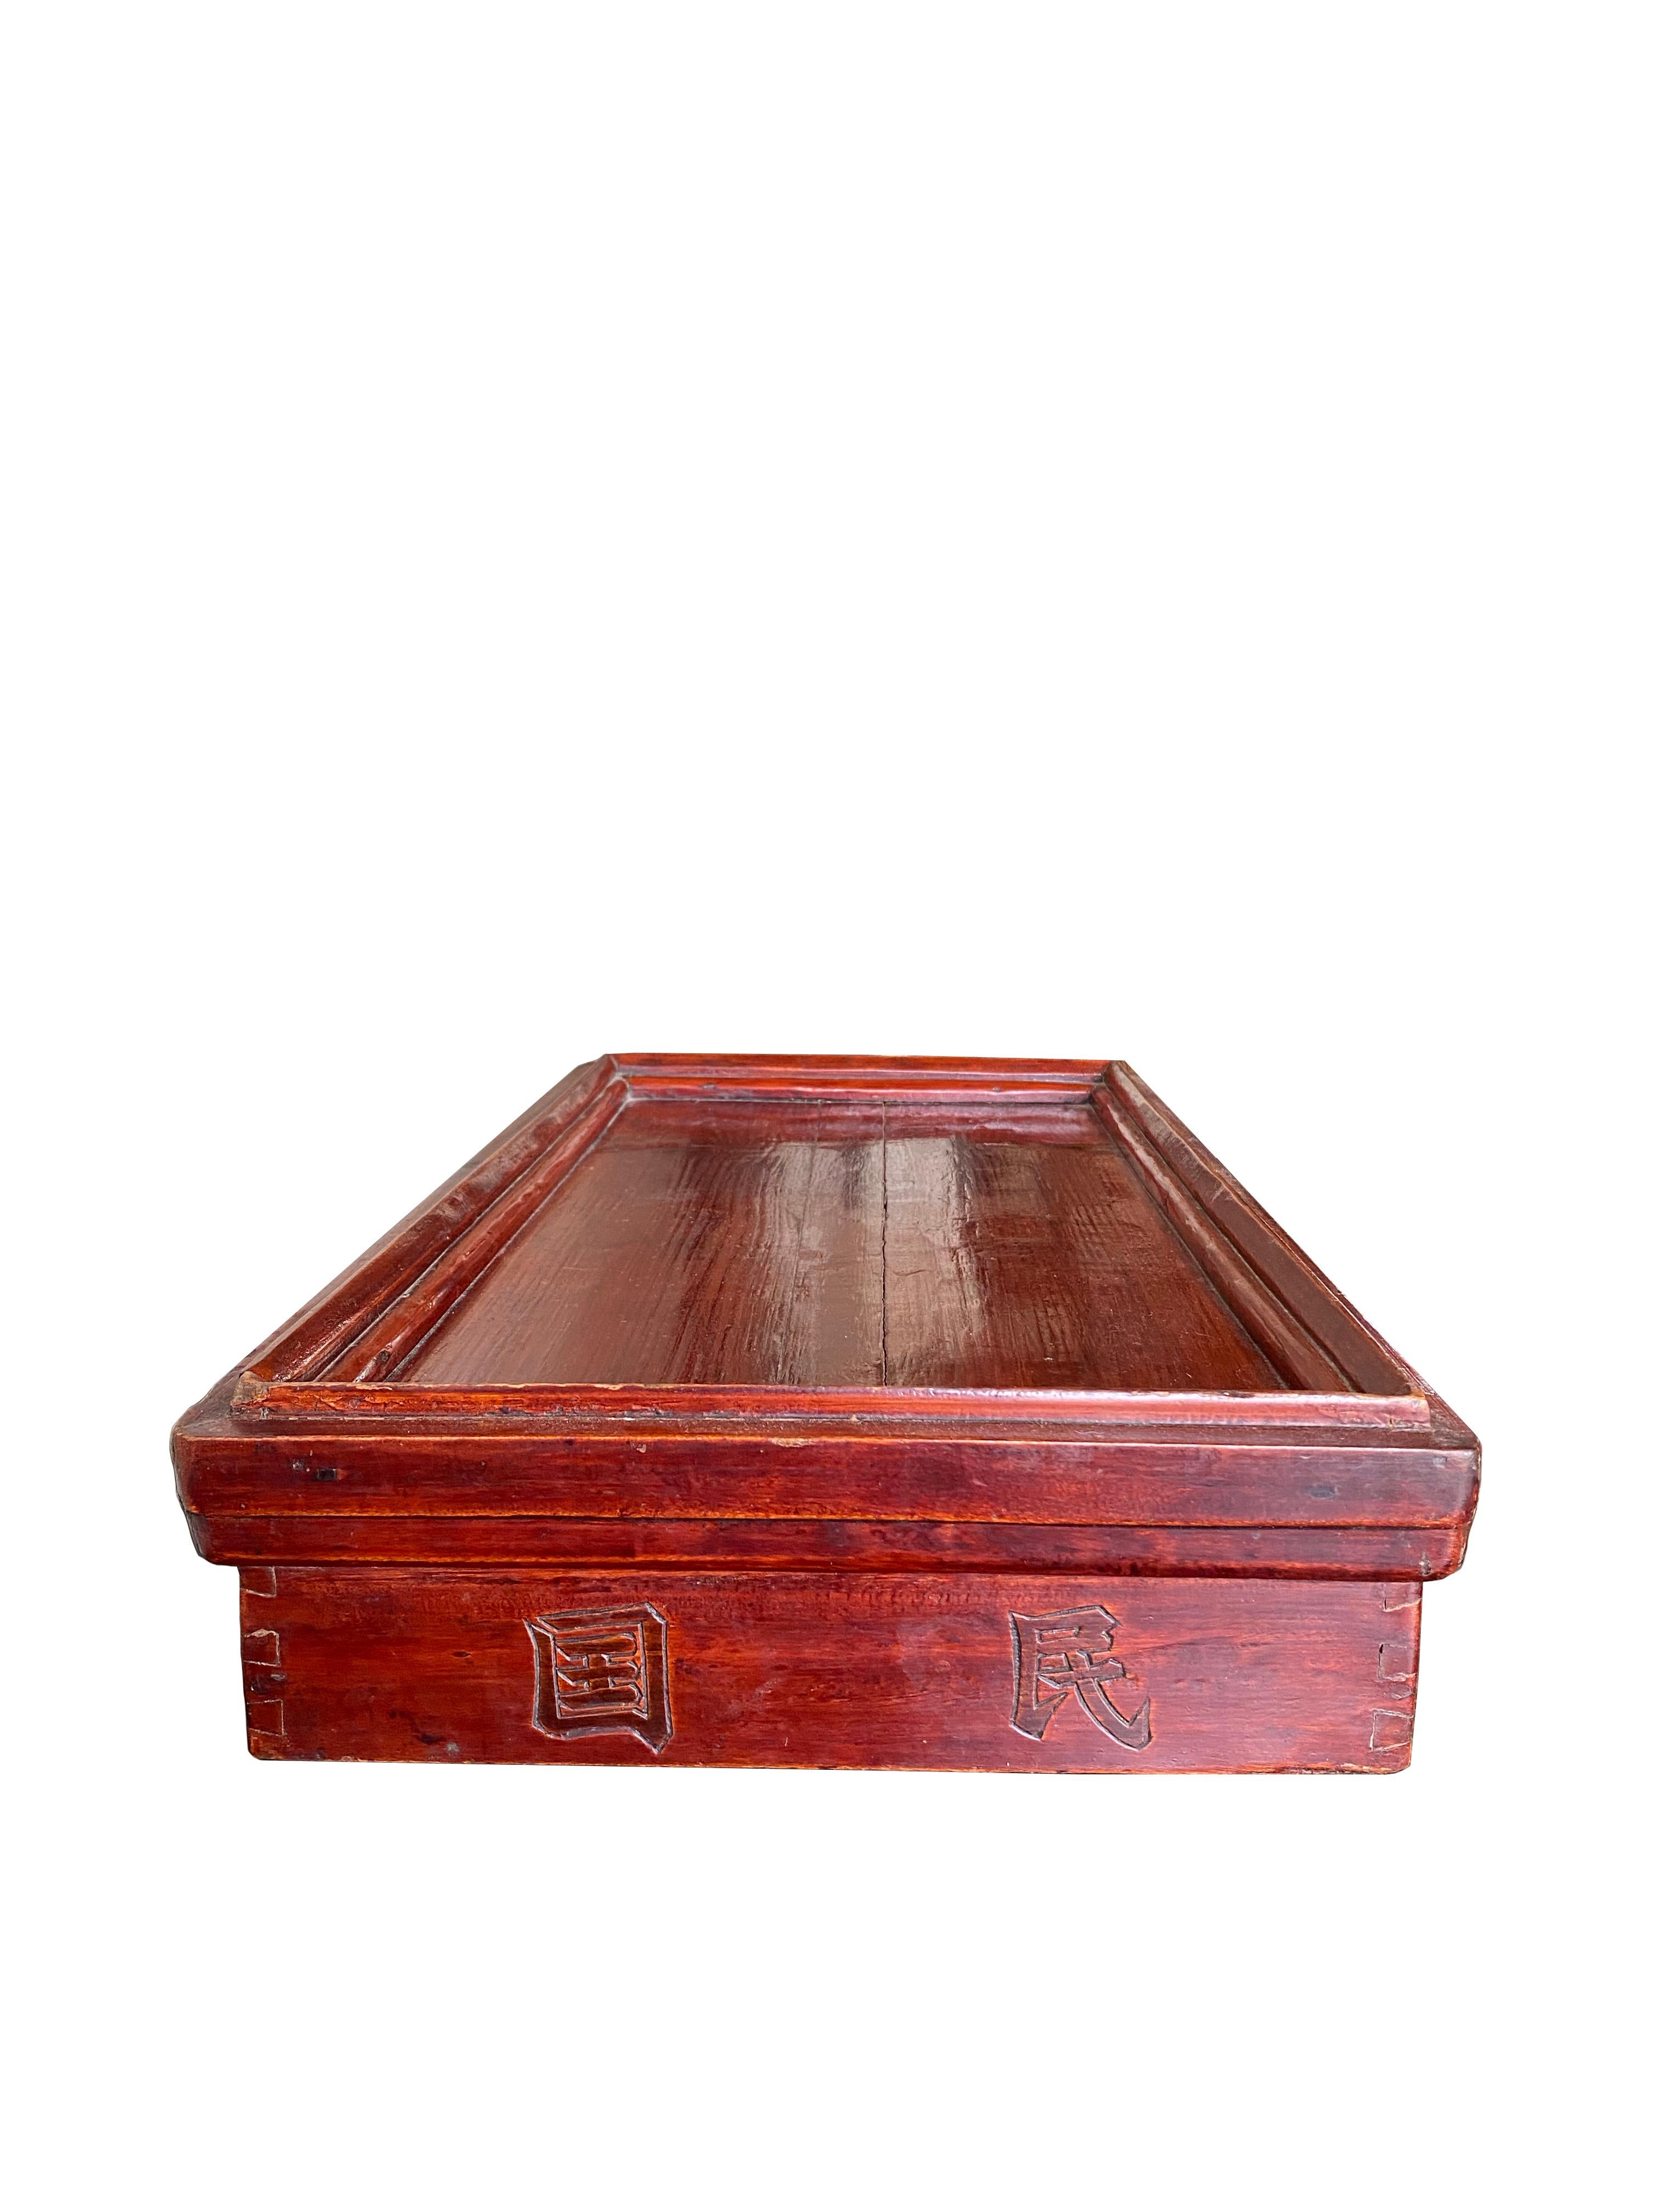 Other Chinese Burgundy Lacquered Tray with Character Engravings, Mid-20th Century For Sale